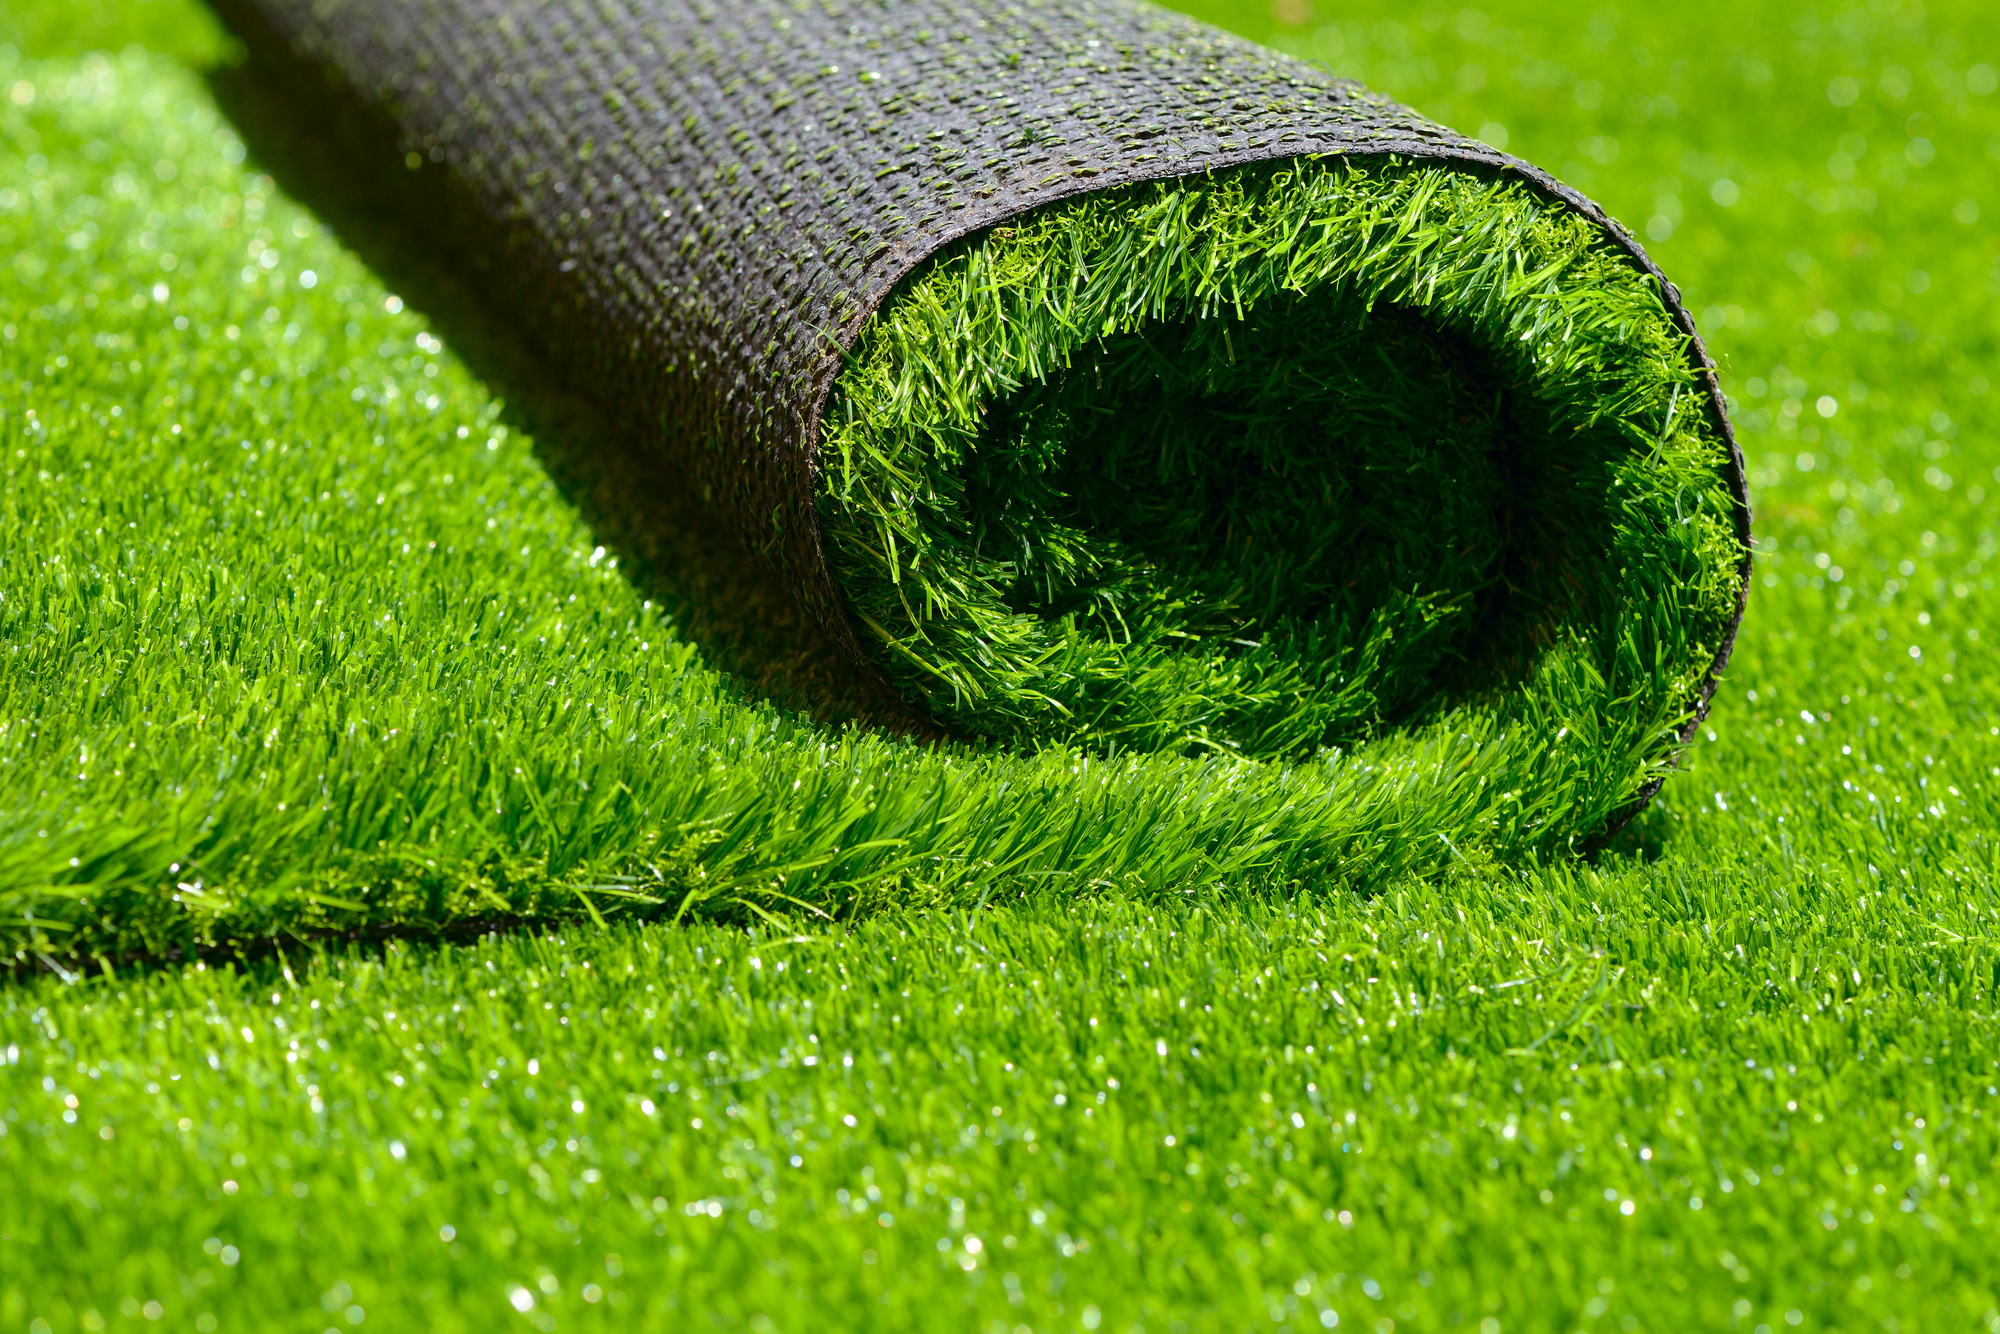 Get Your Turf On: How to Install Artificial Grass